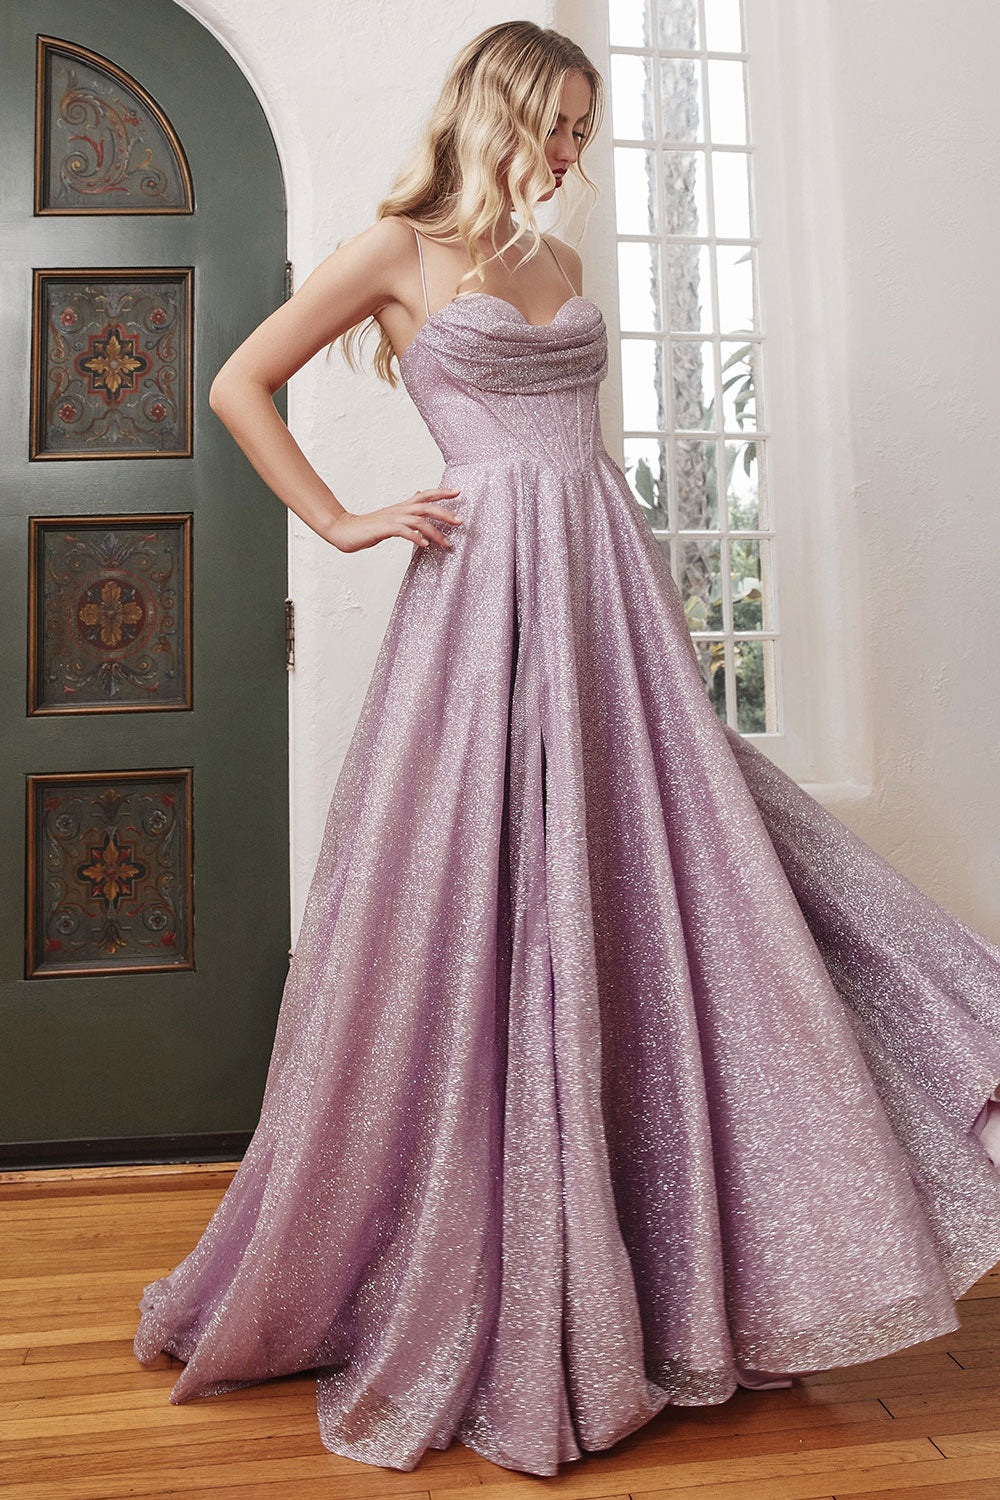 Lexy Lilac Sparkly Cowl Neck Maxi Dress | Boutique 1861 on model 2